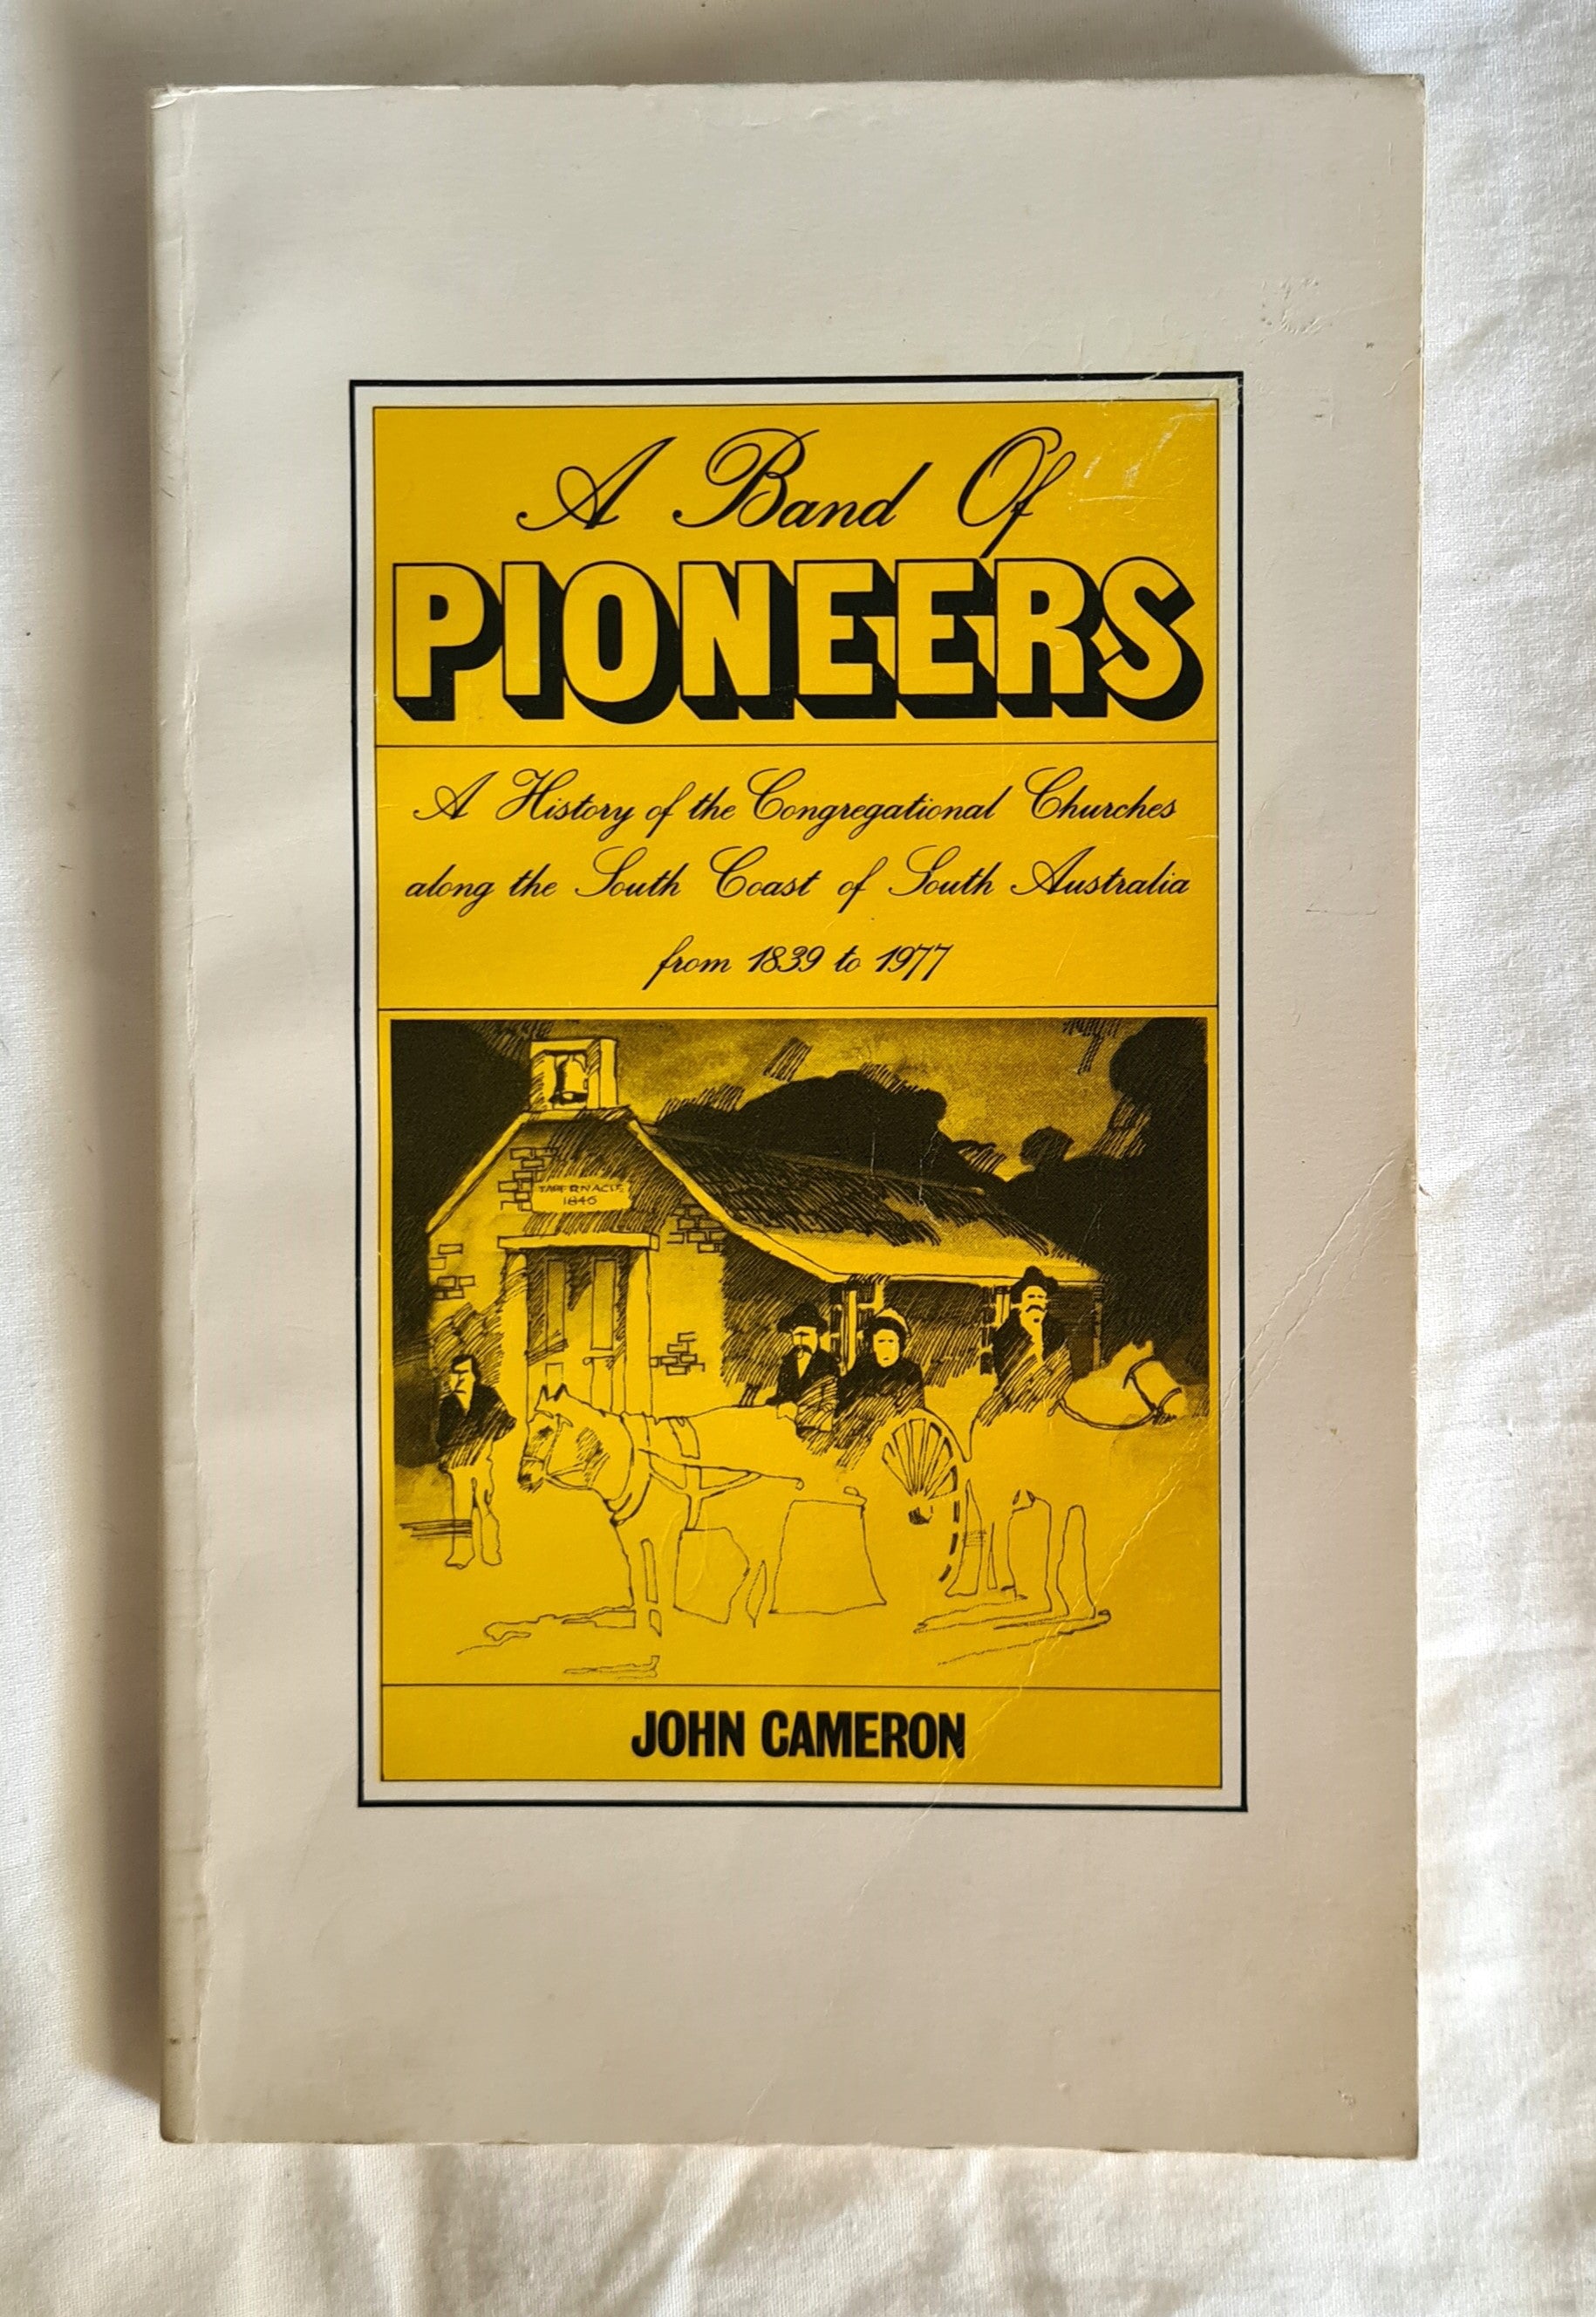 A Band of Pioneers  A History of the Congregational Churches along the South Coast from 1839-1977  by John Cameron